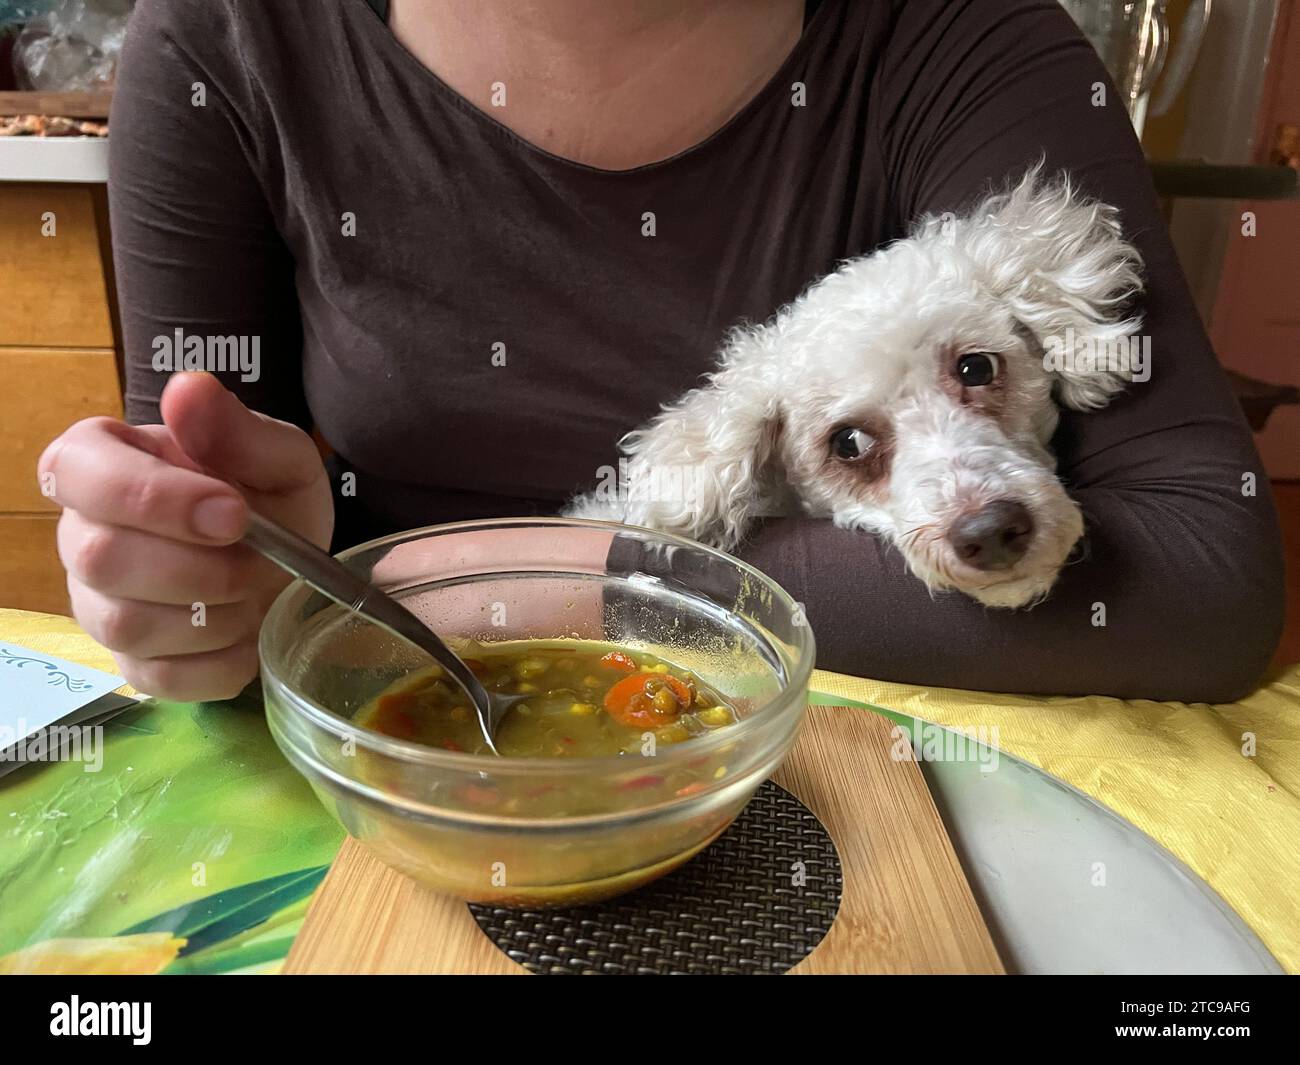 Dog eyeing his master's soup on the kitchen table. Stock Photo